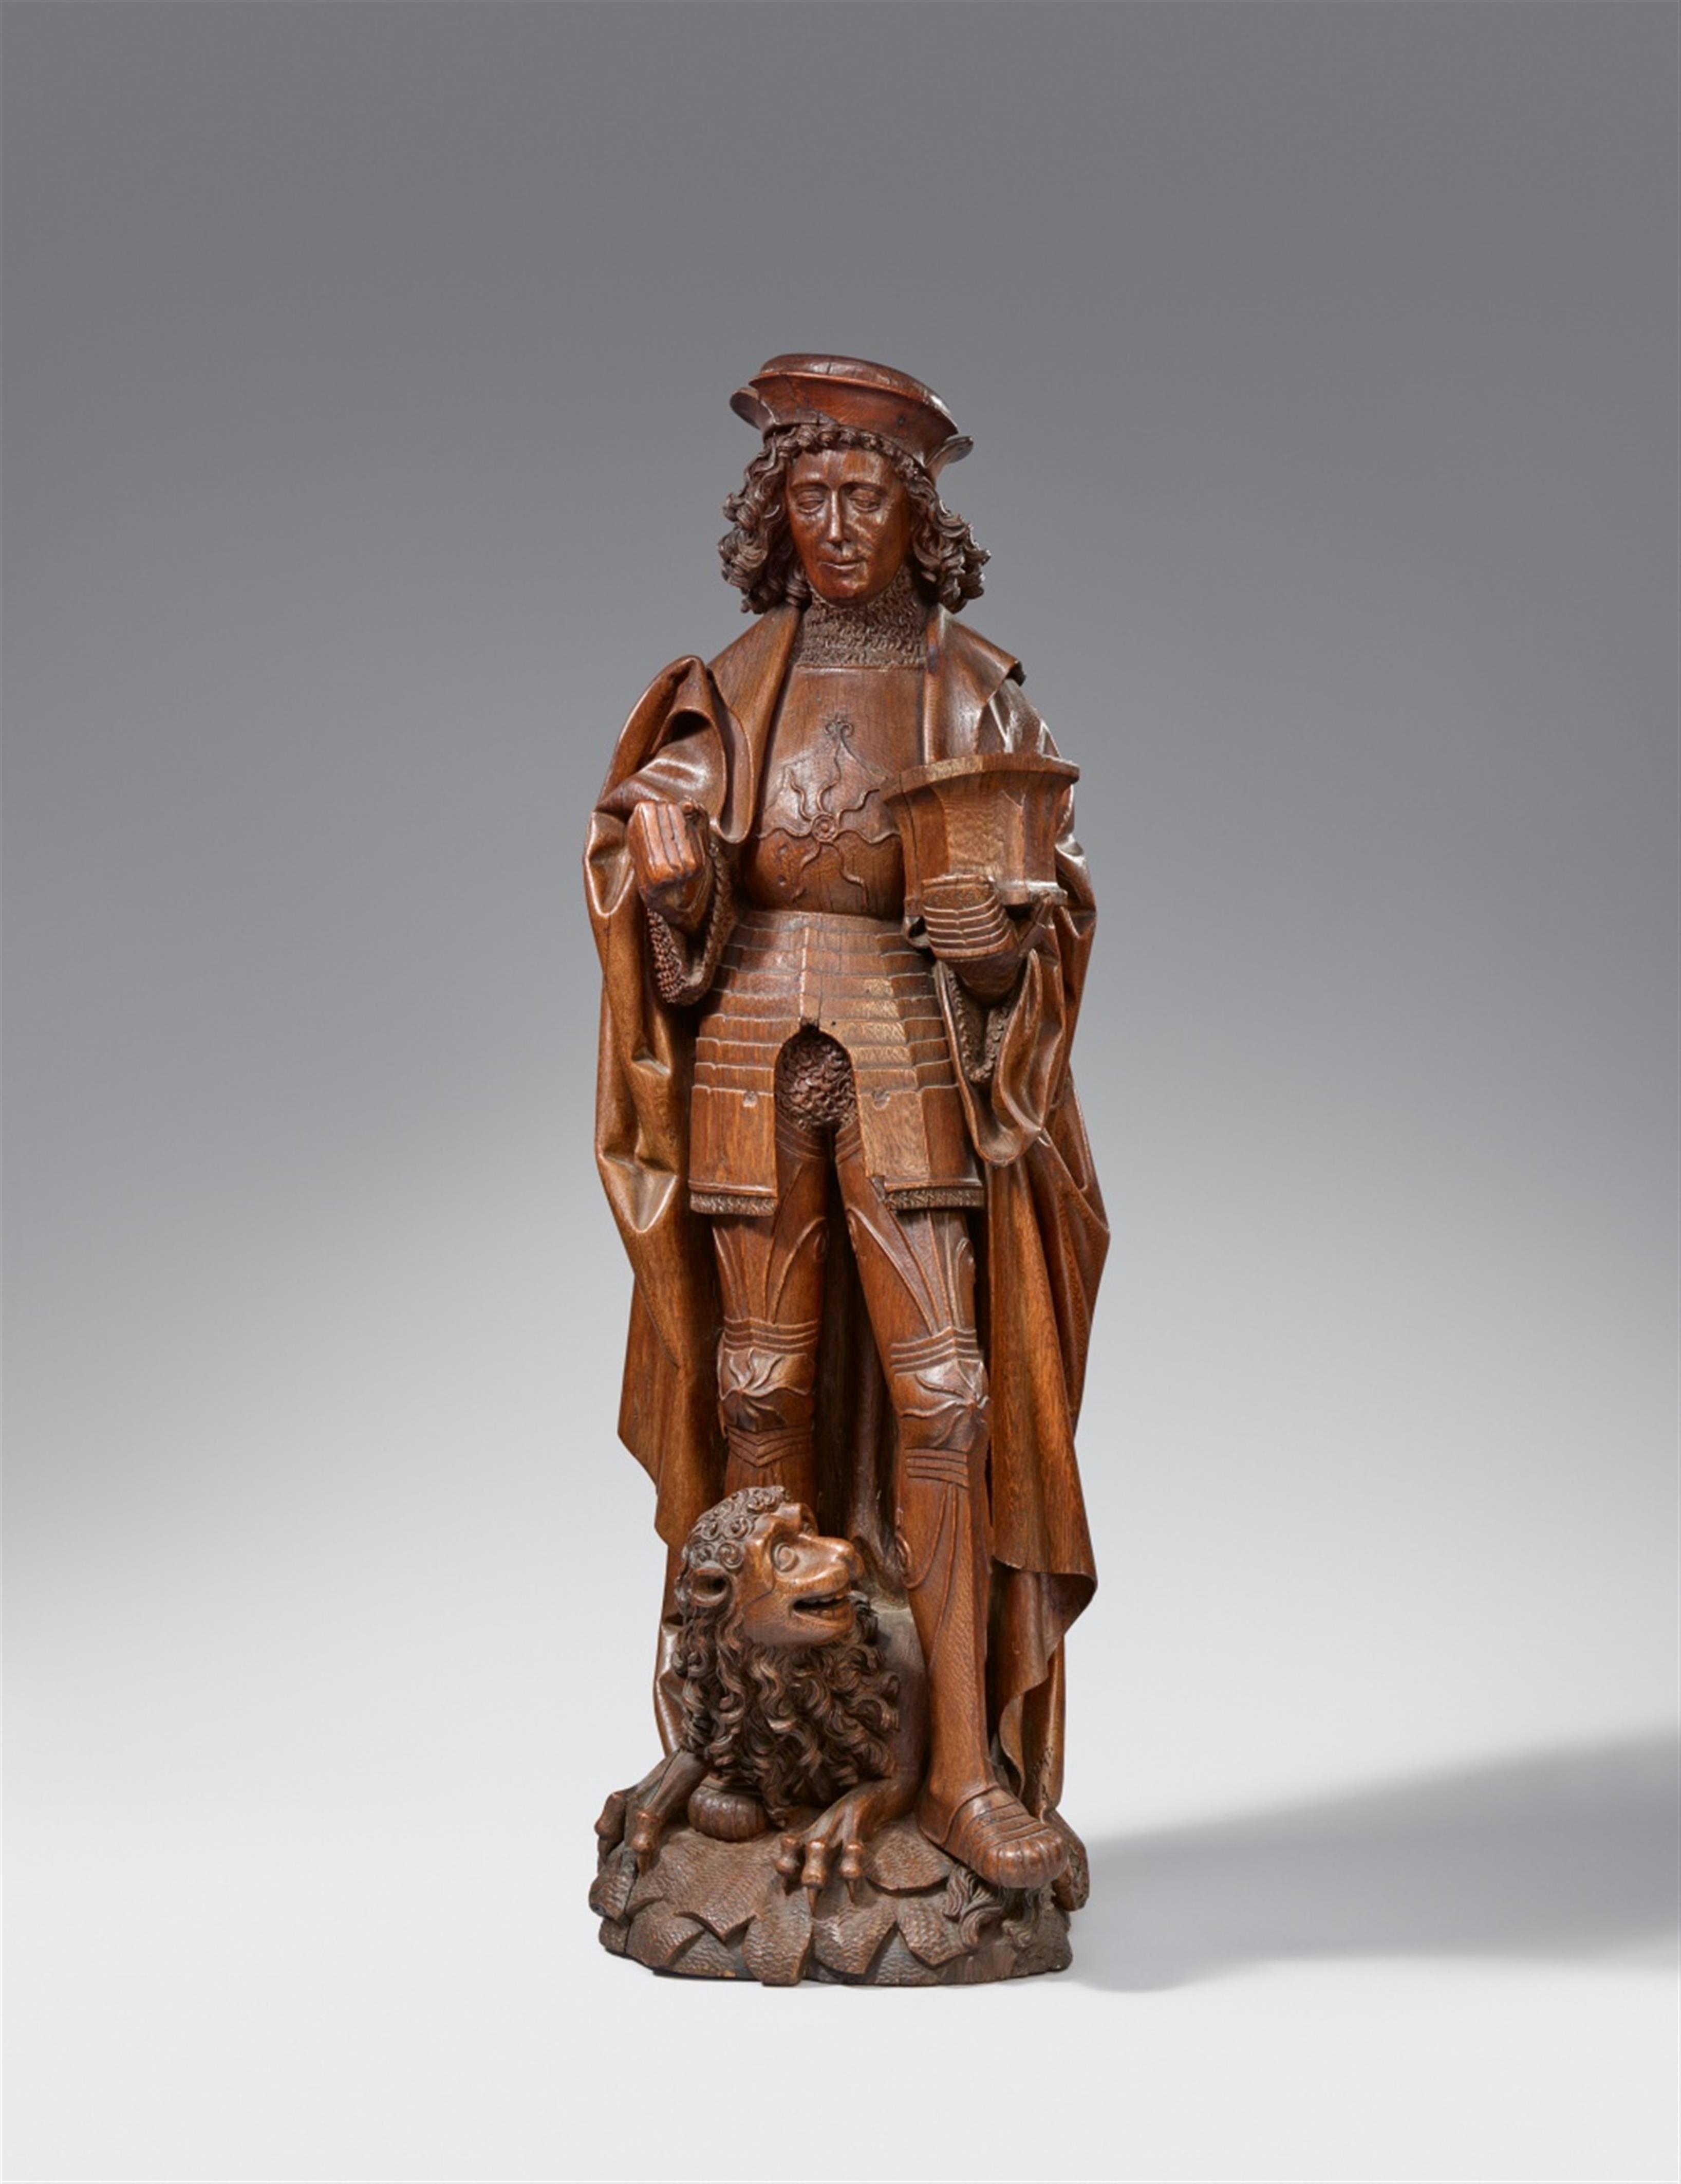 Dries Holthuys, studio of - A carved oak figure of Saint Adrian from the studio of Dries Holthuys - image-1